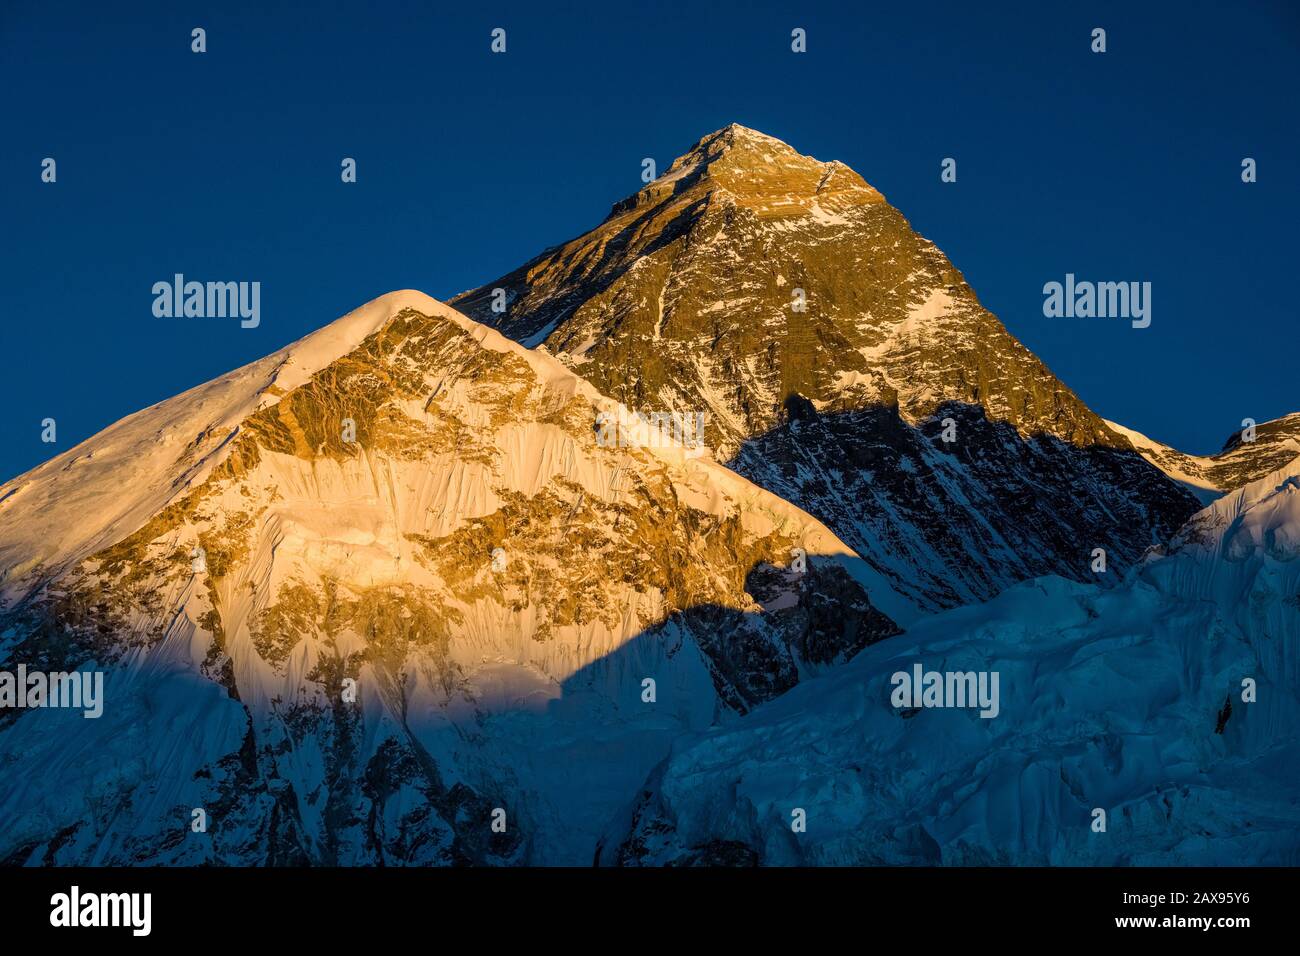 The summit of Everest seen from the viewpoint of Kala Patthar, Nepal Himalayas Stock Photo